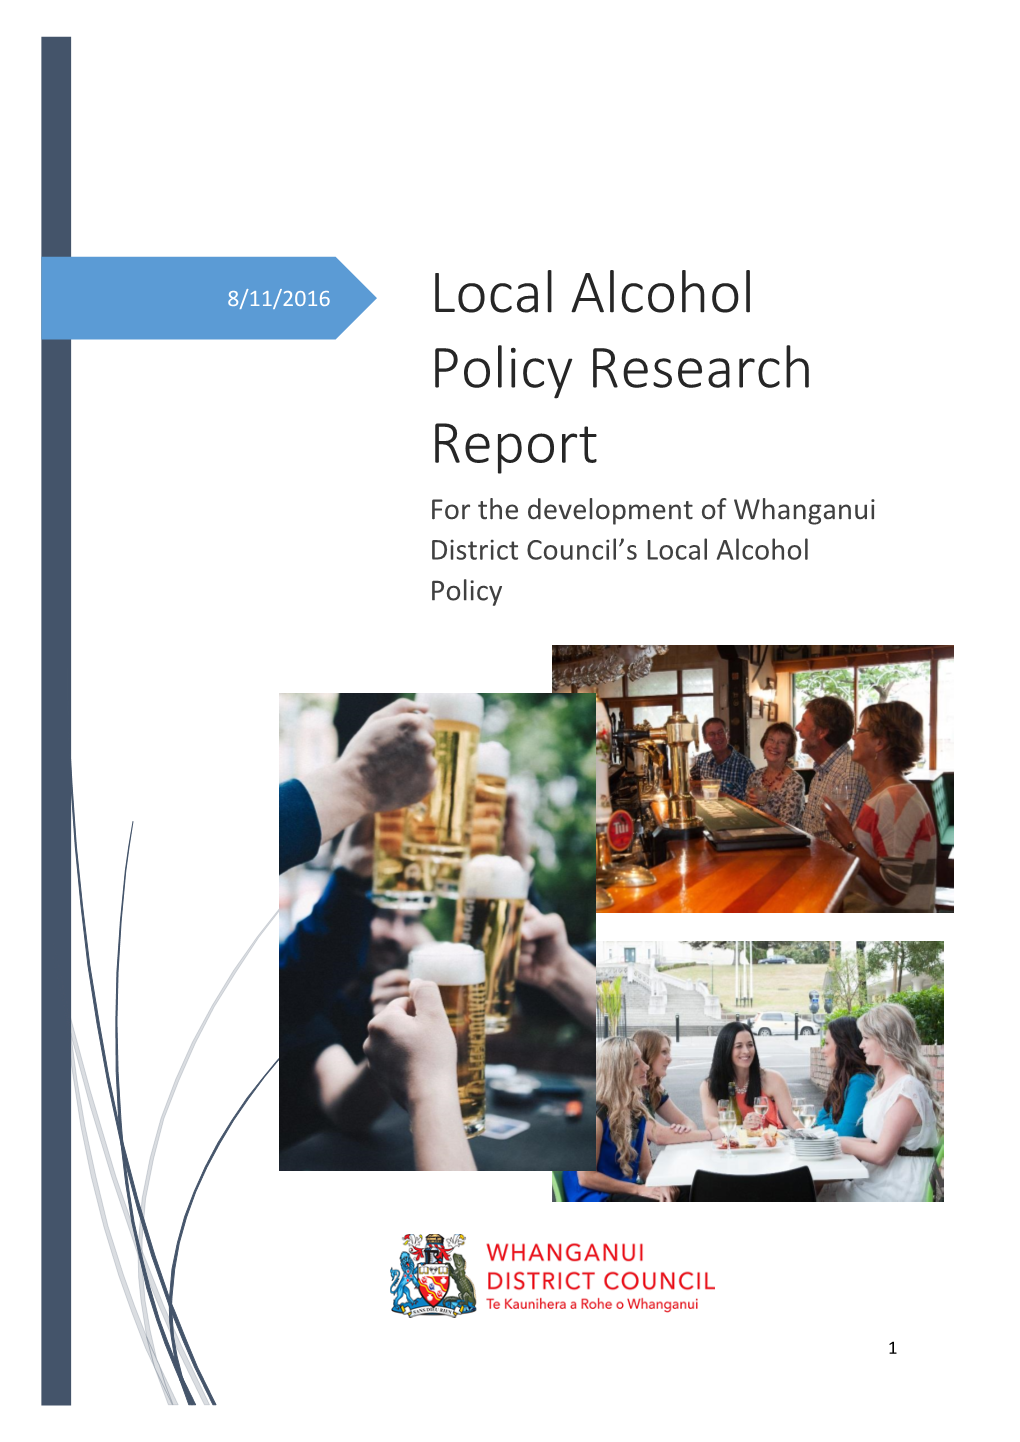 Local Alcohol Policy Research Report for the Development of Whanganui District Council’S Local Alcohol Policy